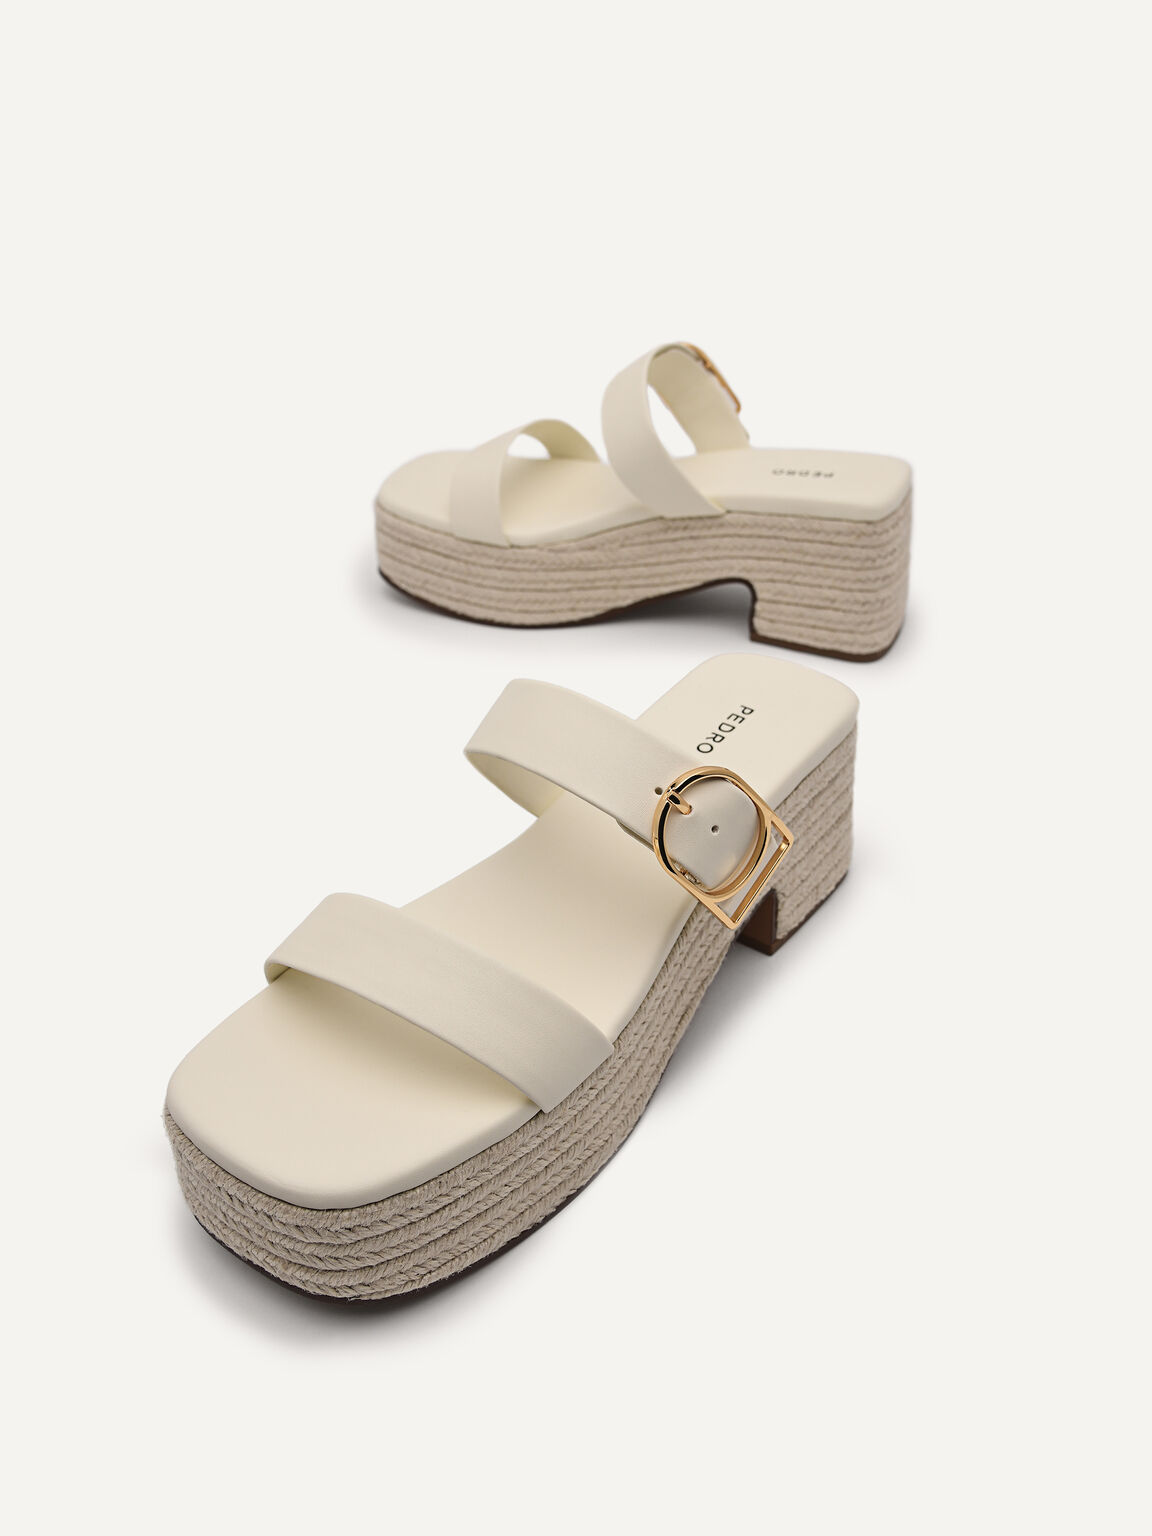 Knox Woven Wedge Sandals, Chalk